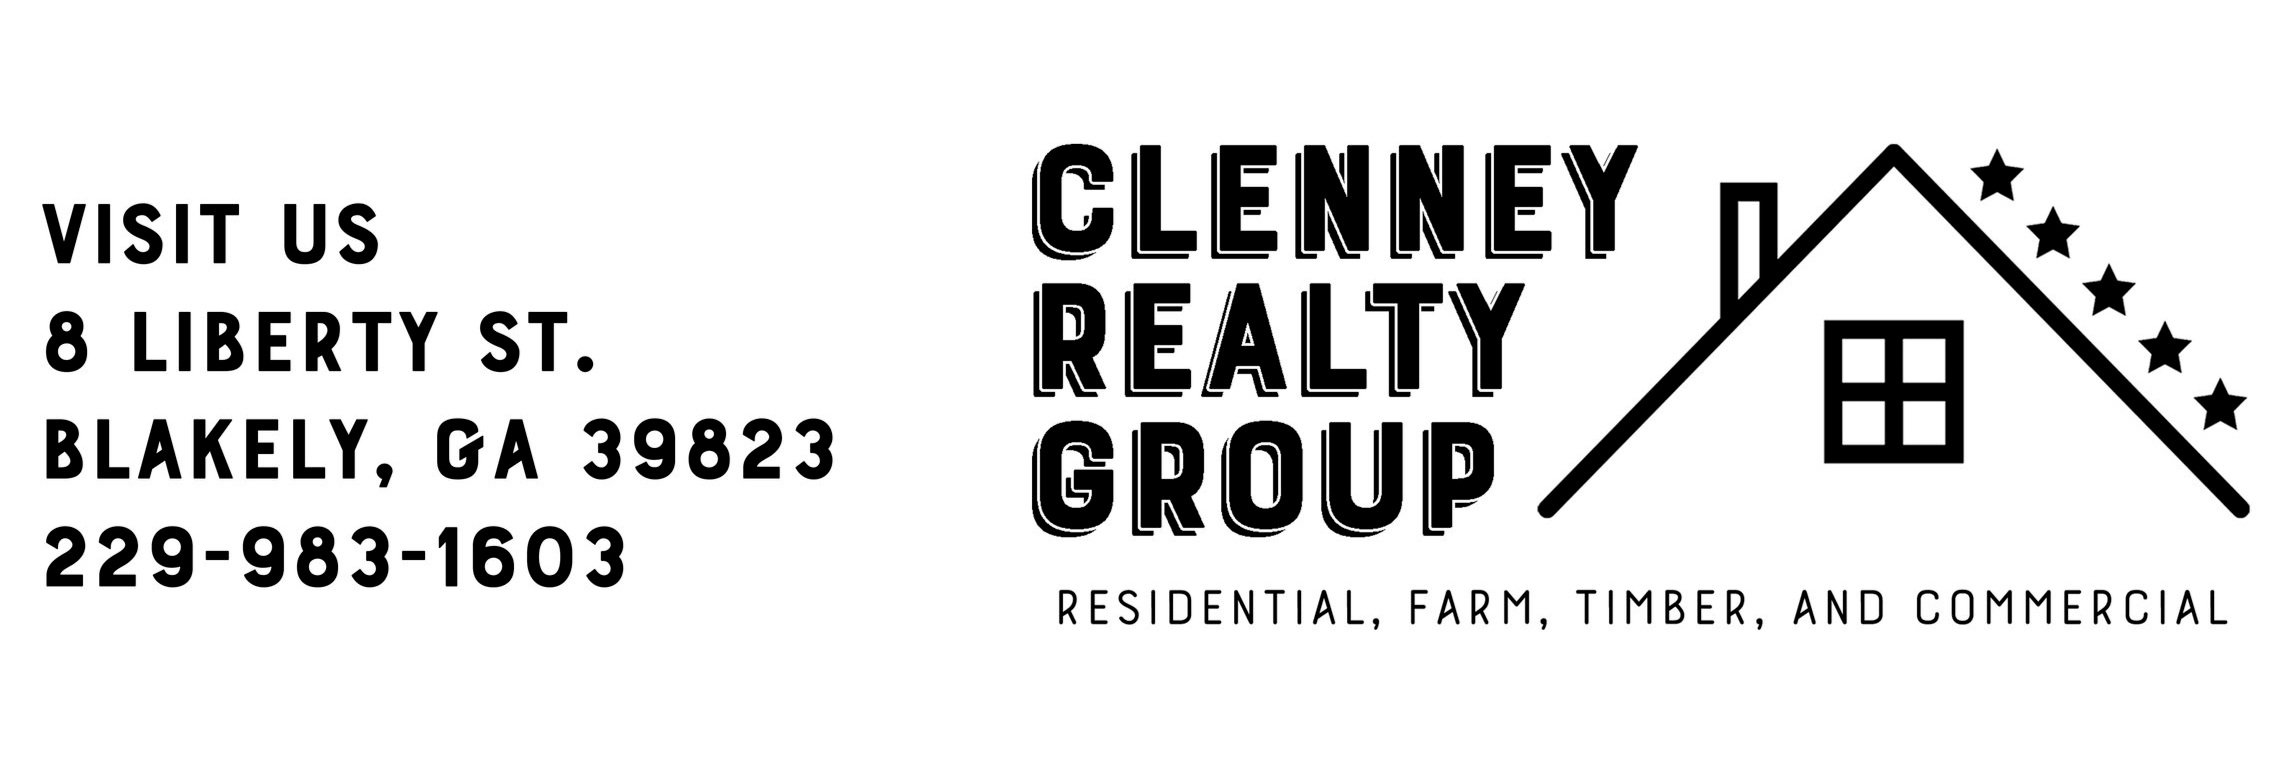 Clenney Realty Group